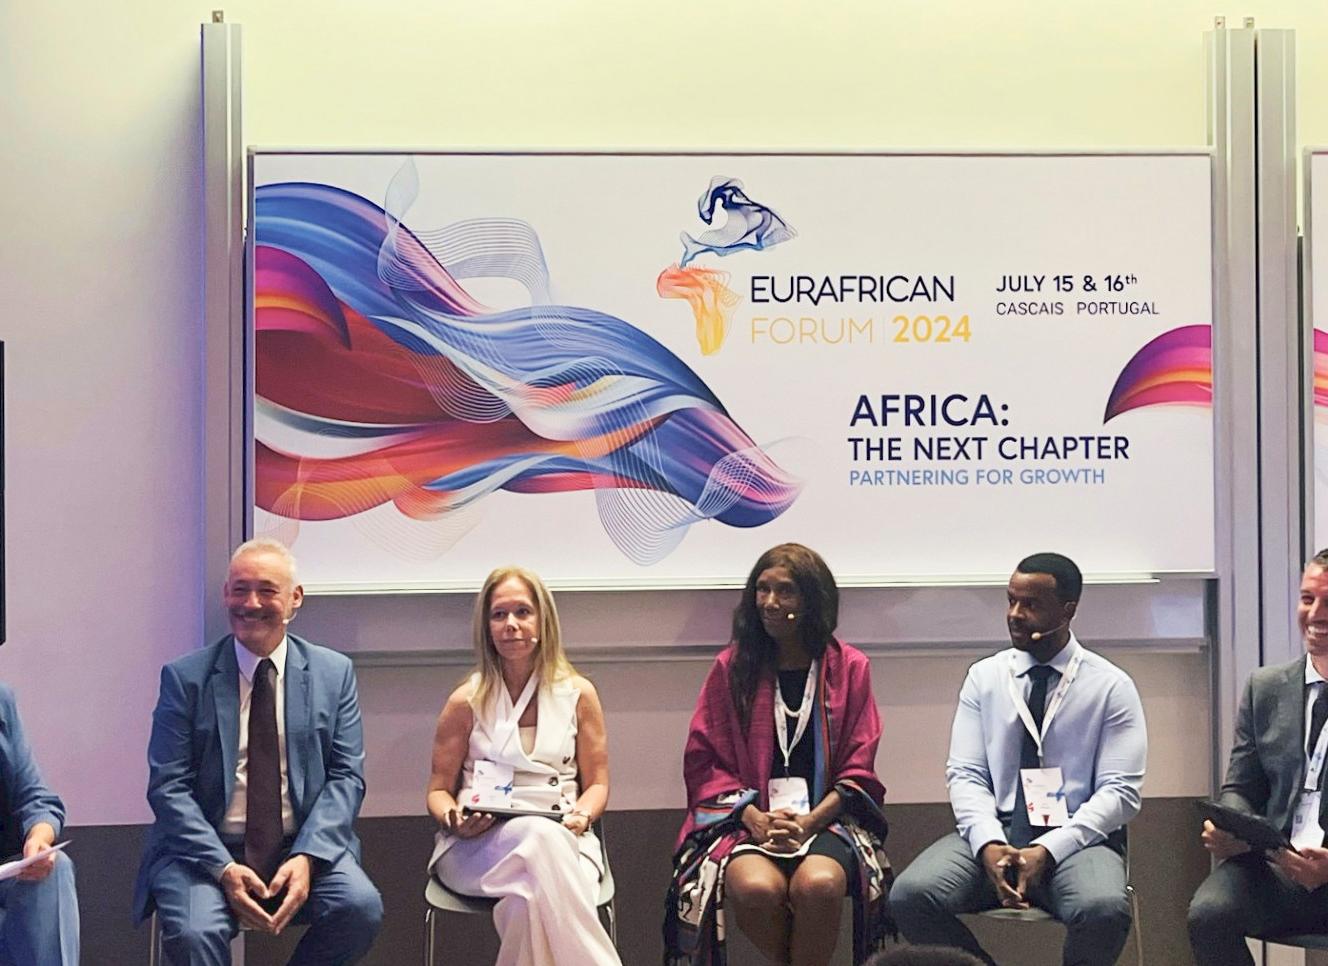 Isabel Capeloa Gil takes part in the 7th edition of the EurAfrican Forum 2024